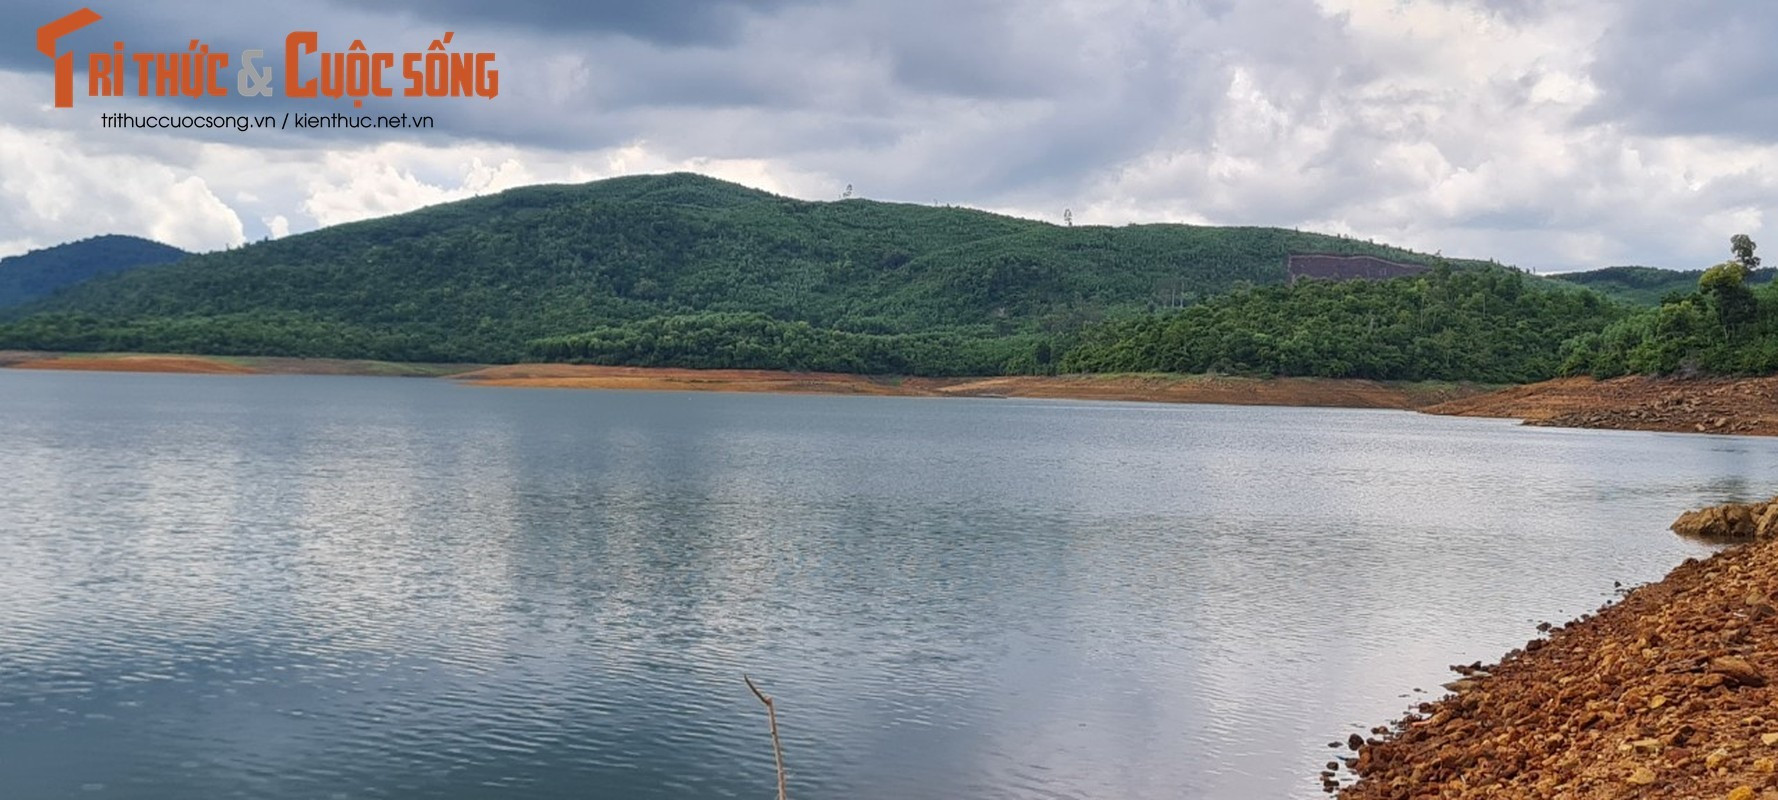 Phu Ninh lake provides irrigation water for 23,000 hectares of agricultural land in Nui Thanh, Thang Binh, Que Son and Phu Ninh districts and Tam Ky city.